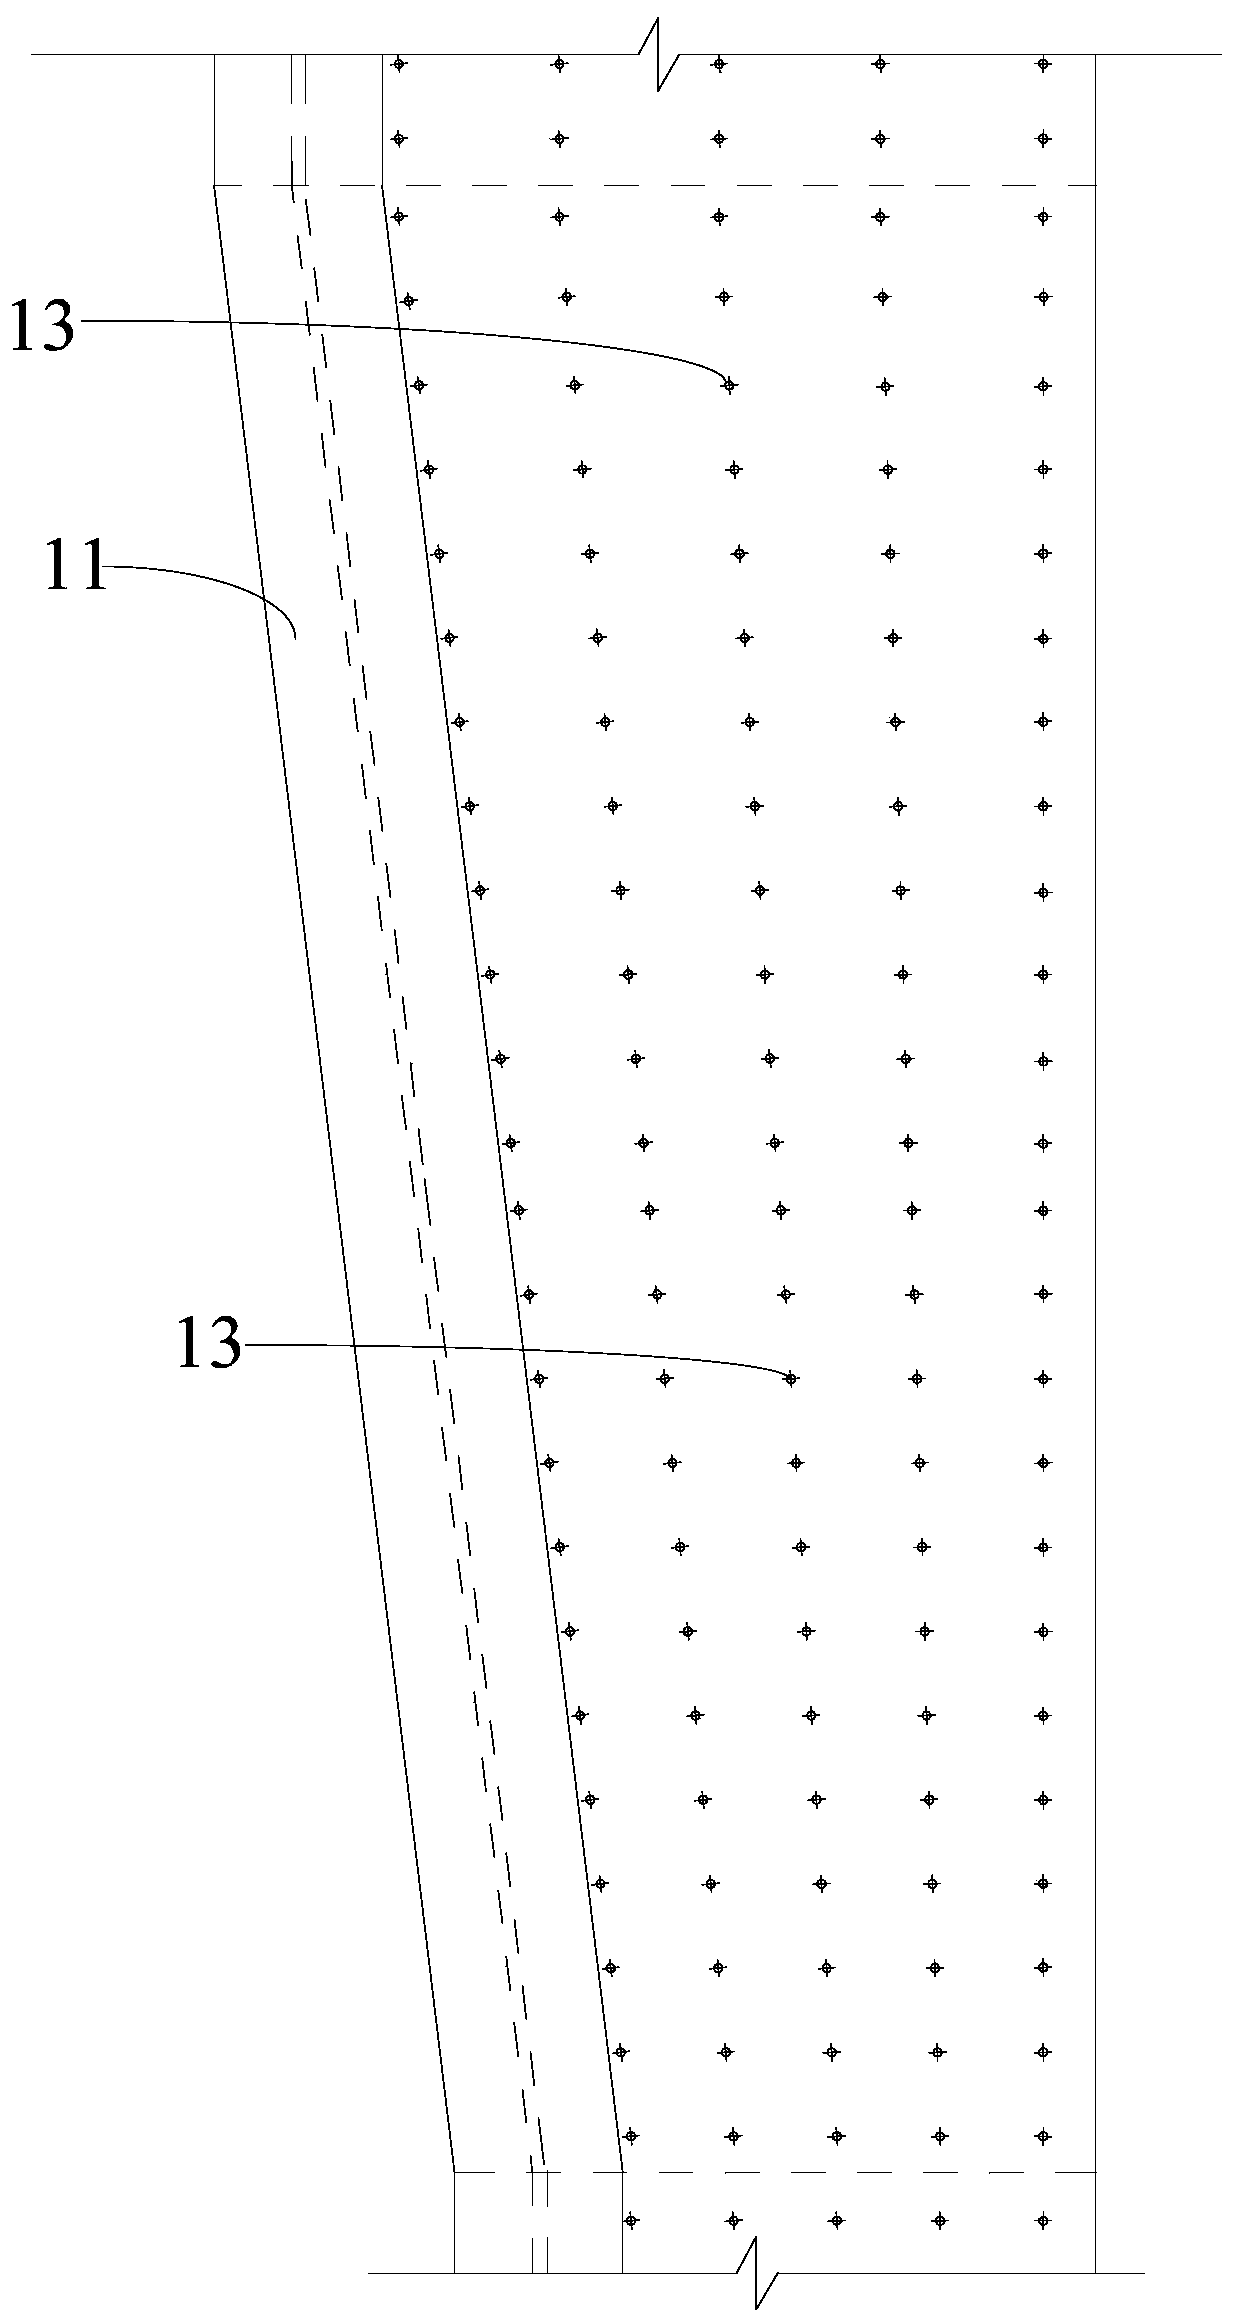 A divergent arrangement system and construction method of steel bars in inclined section slab walls